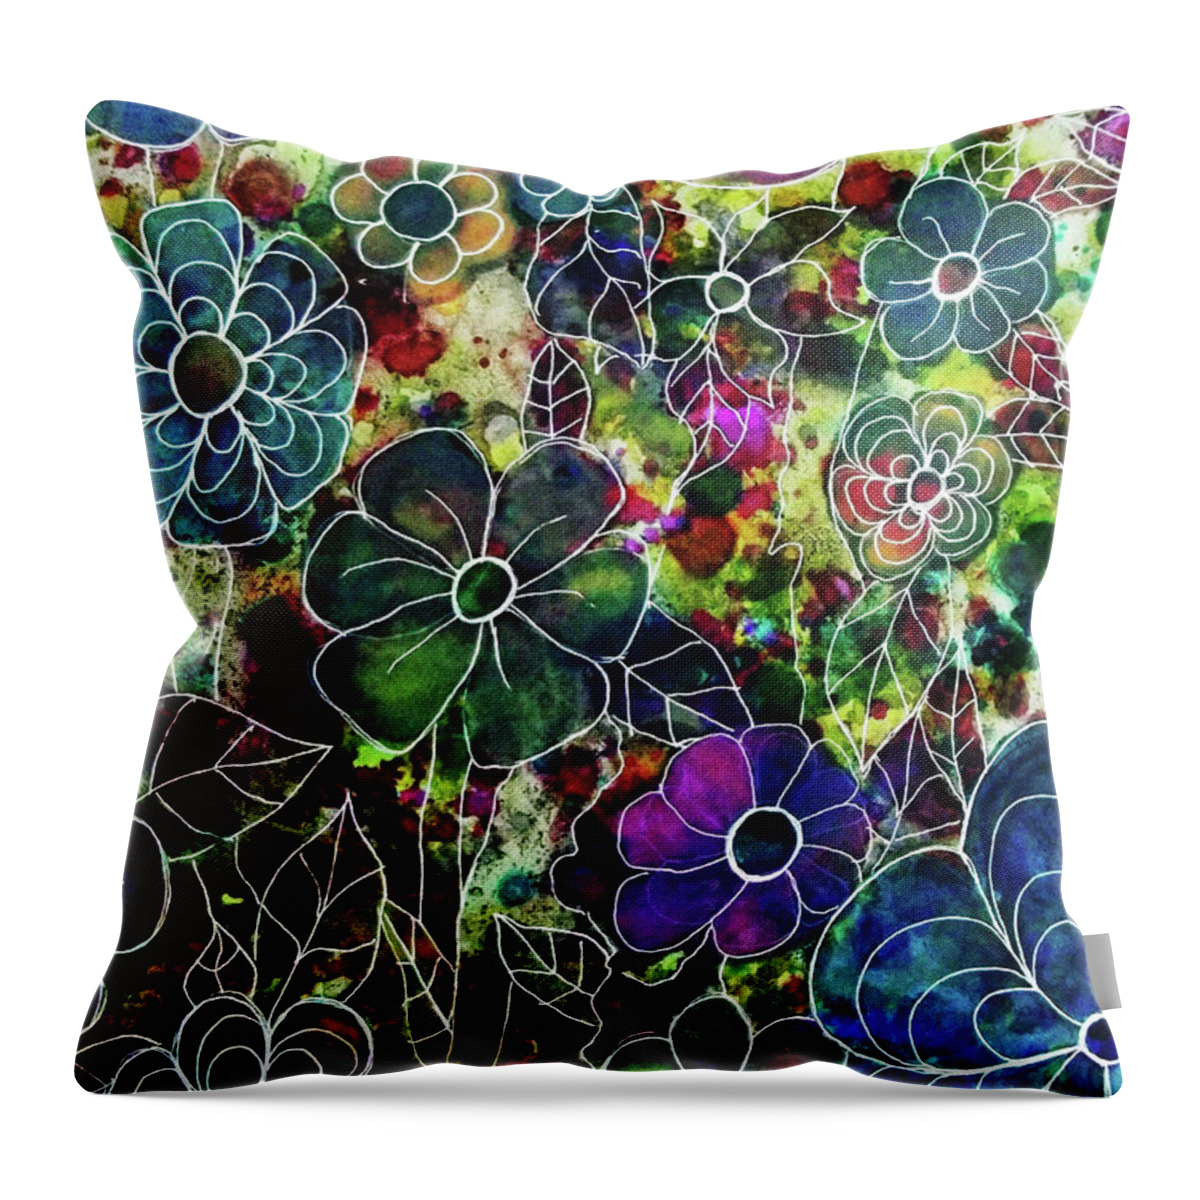 Flower Throw Pillow featuring the painting Flowers In Bloom by Melinda Firestone-White